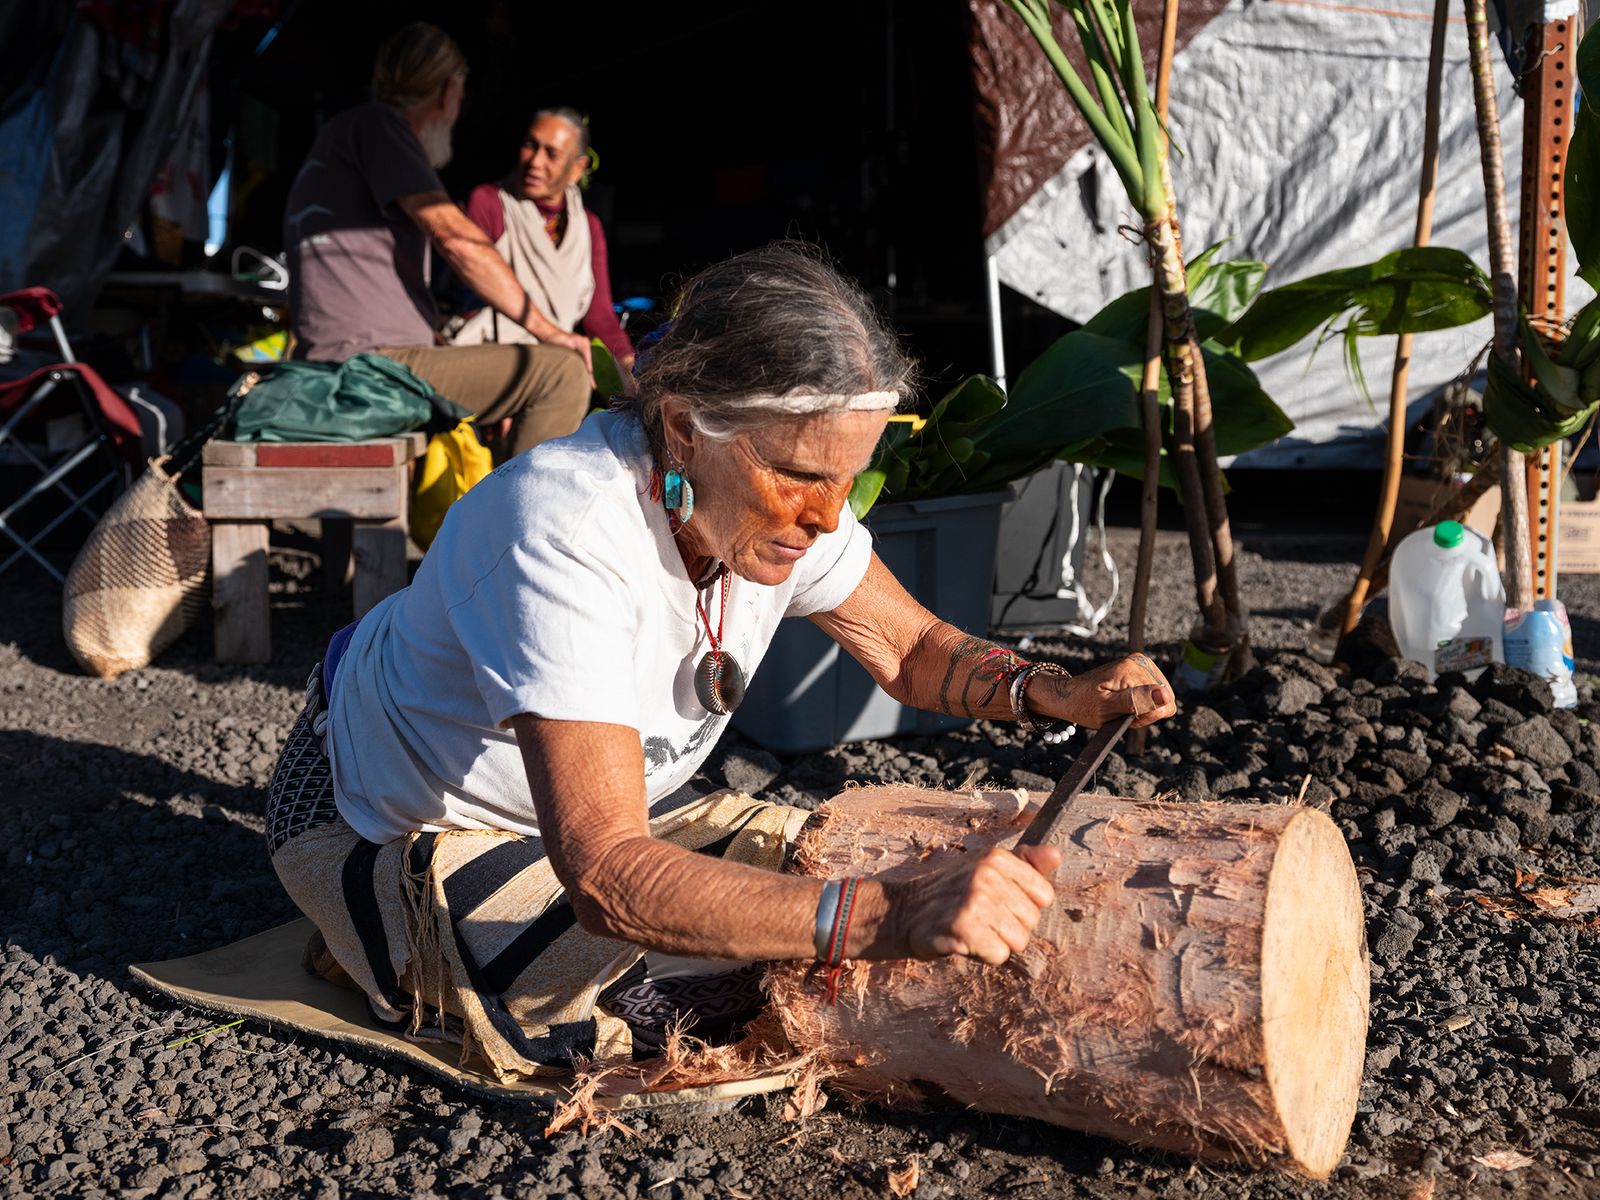 © Molly Peters - Aunty Clare, a midwife, works on carving a drum near the Kūpuna tent. Aunty Scarlett and Uncle Jon chat in the background.